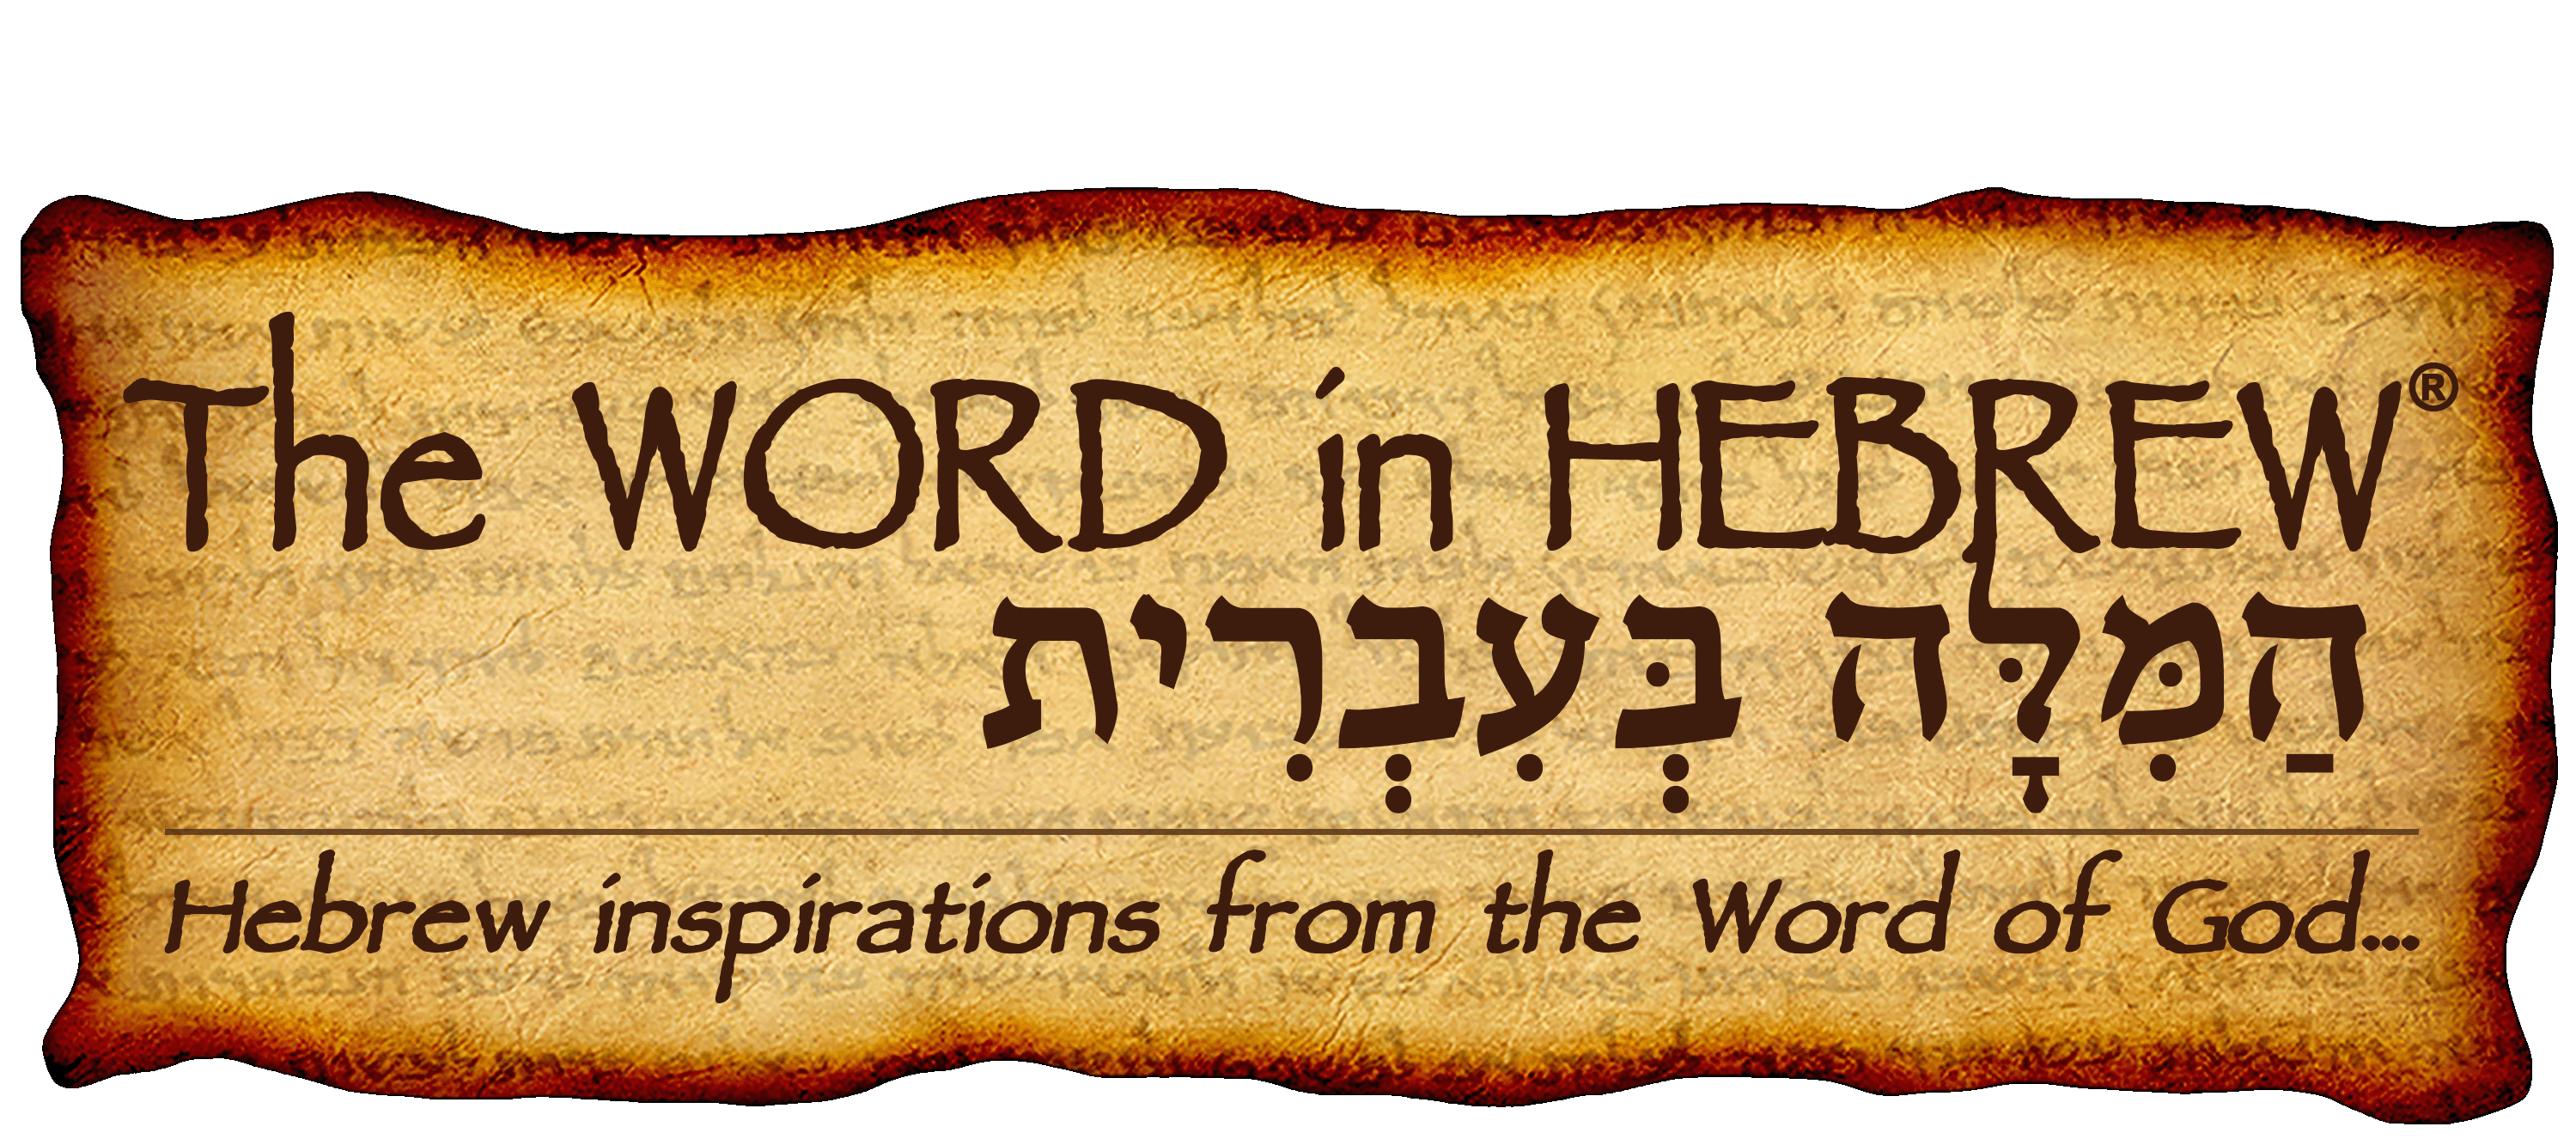 Charts The WORD In HEBREW